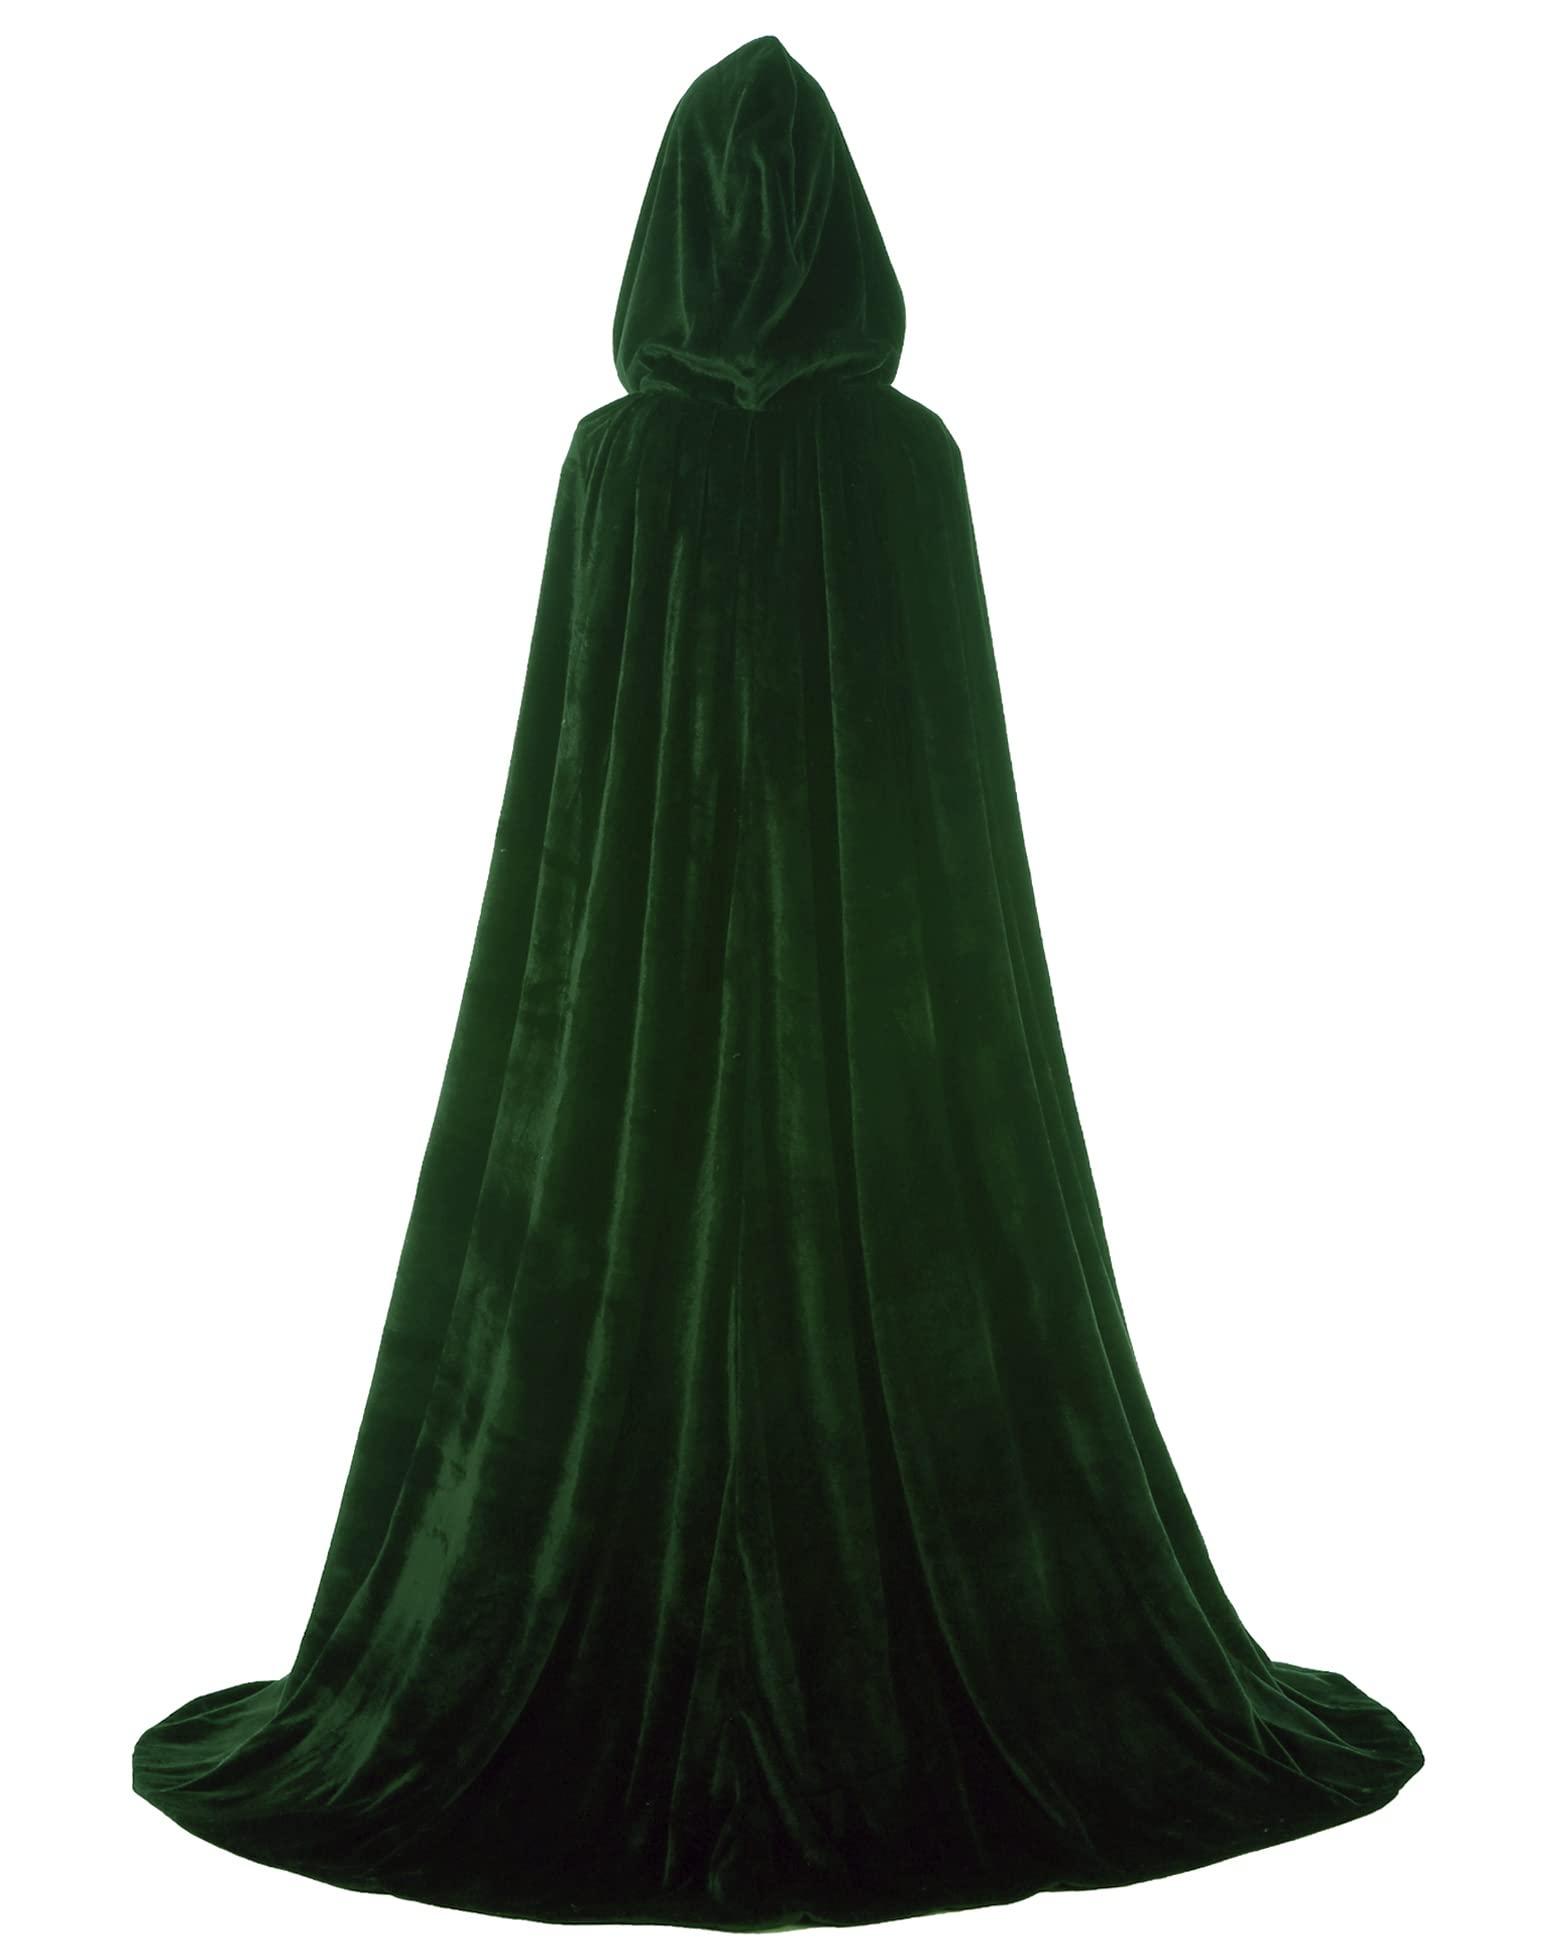 LuckyMjmy Velvet Medieval Wedding Cape Cloak Lined with Satin lining (Large, Dark green) 2